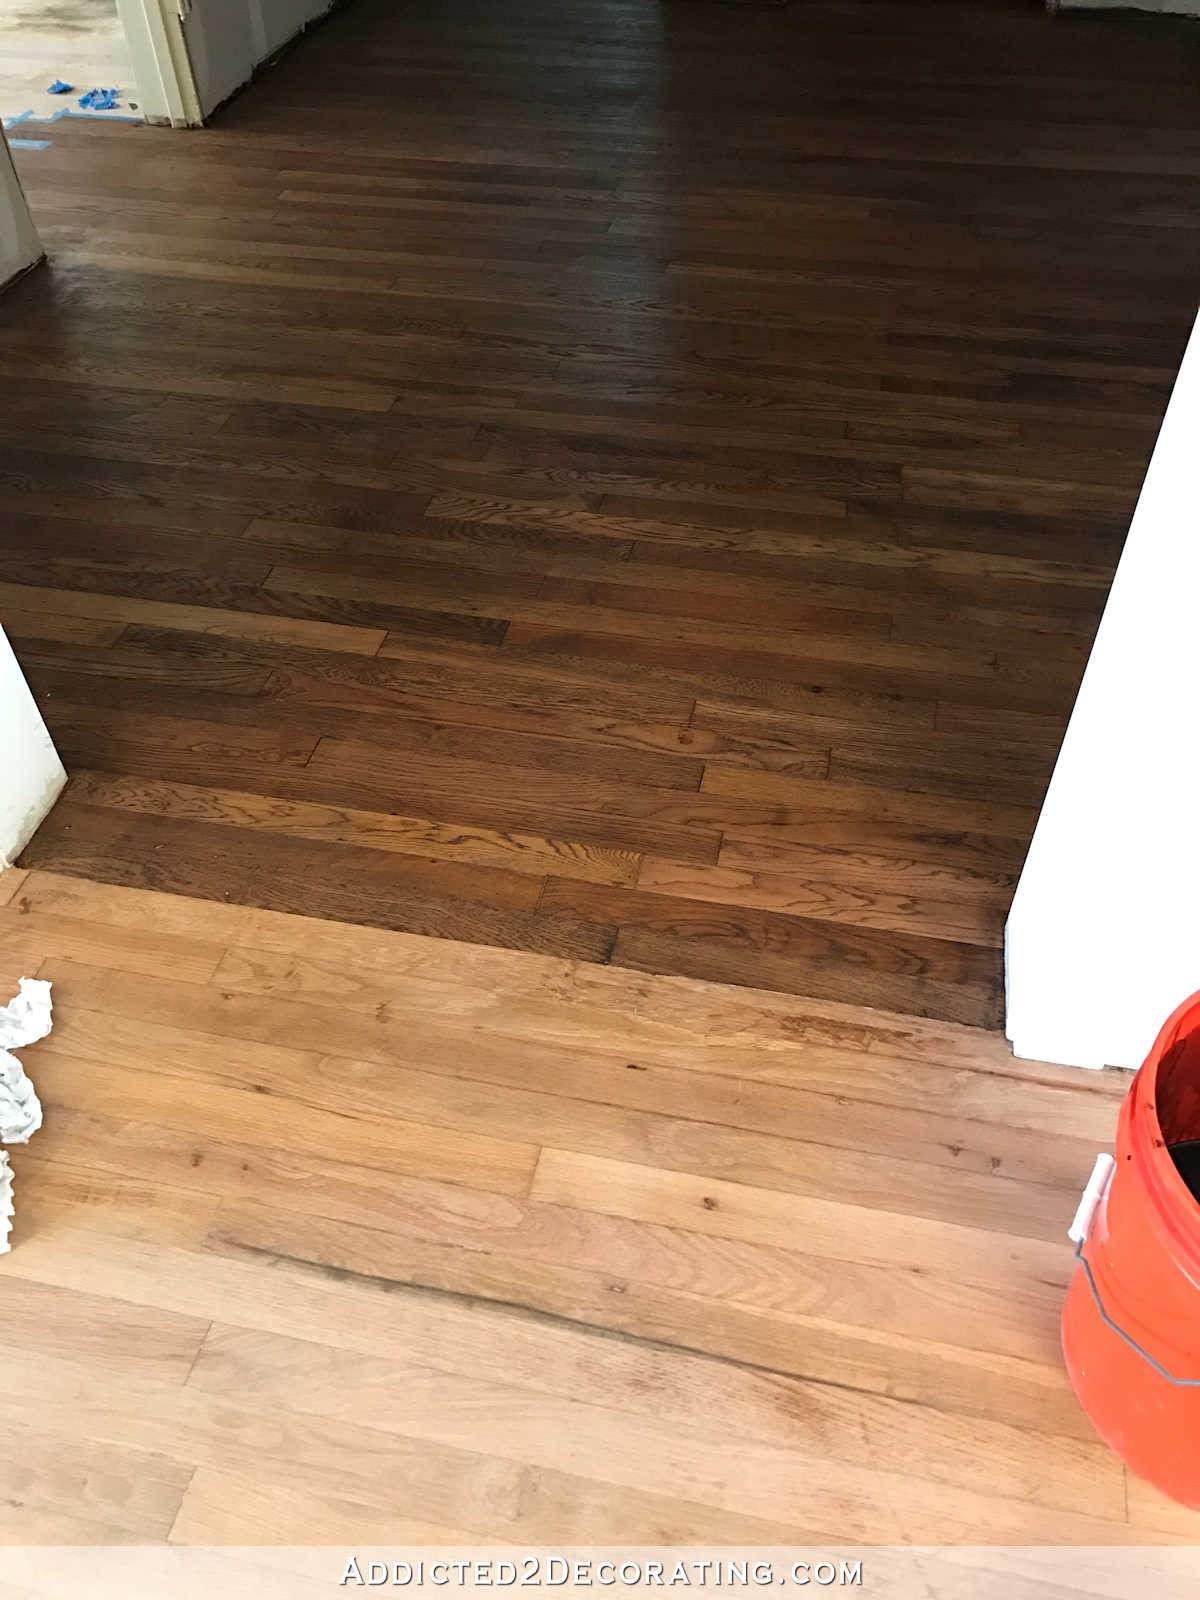 13 Trendy Best Hardwood Floor Sealer 2024 free download best hardwood floor sealer of adventures in staining my red oak hardwood floors products process intended for staining red oak hardwood floors 2 tape off one section at a time for